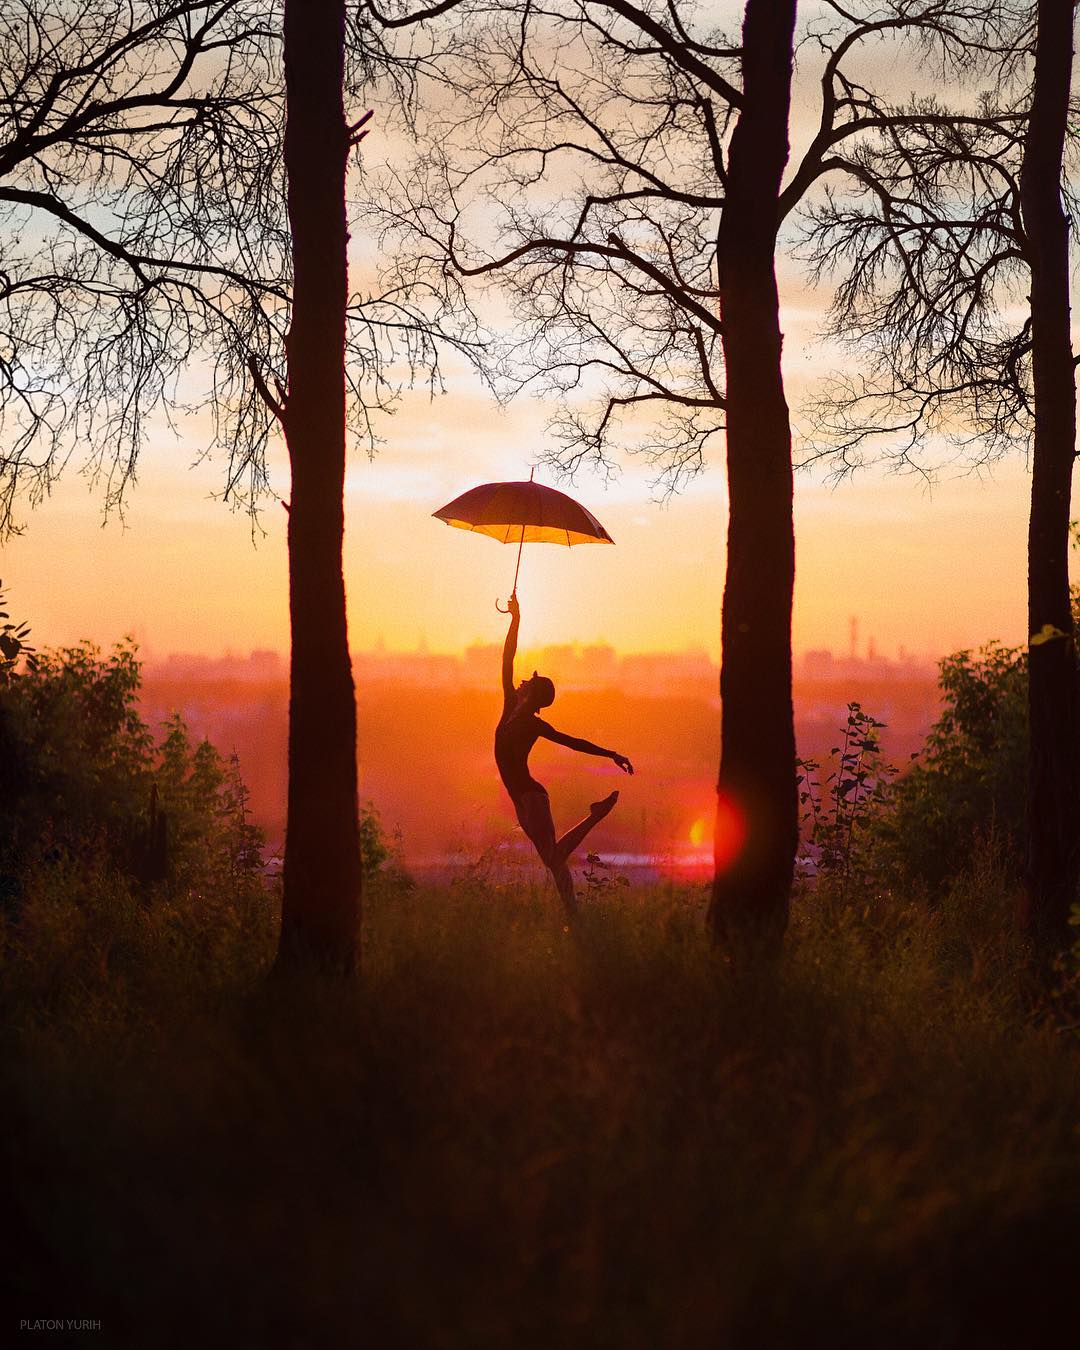 Dreamlike Conceptual Photography Merges Surrealism with